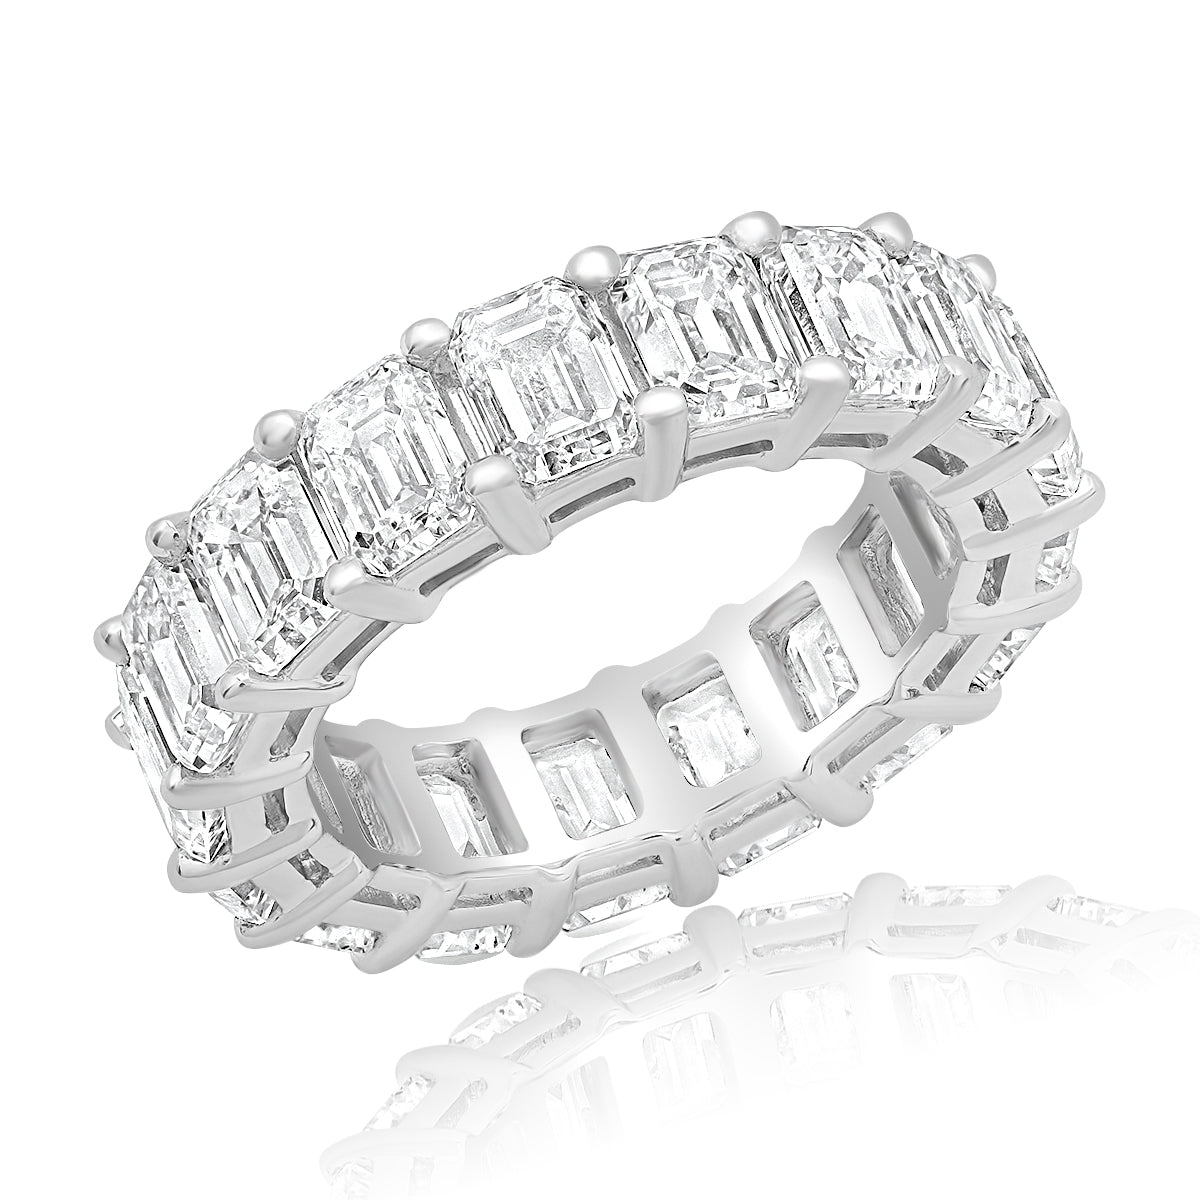 Advise on eternity band for 10 year anniversary | PriceScope